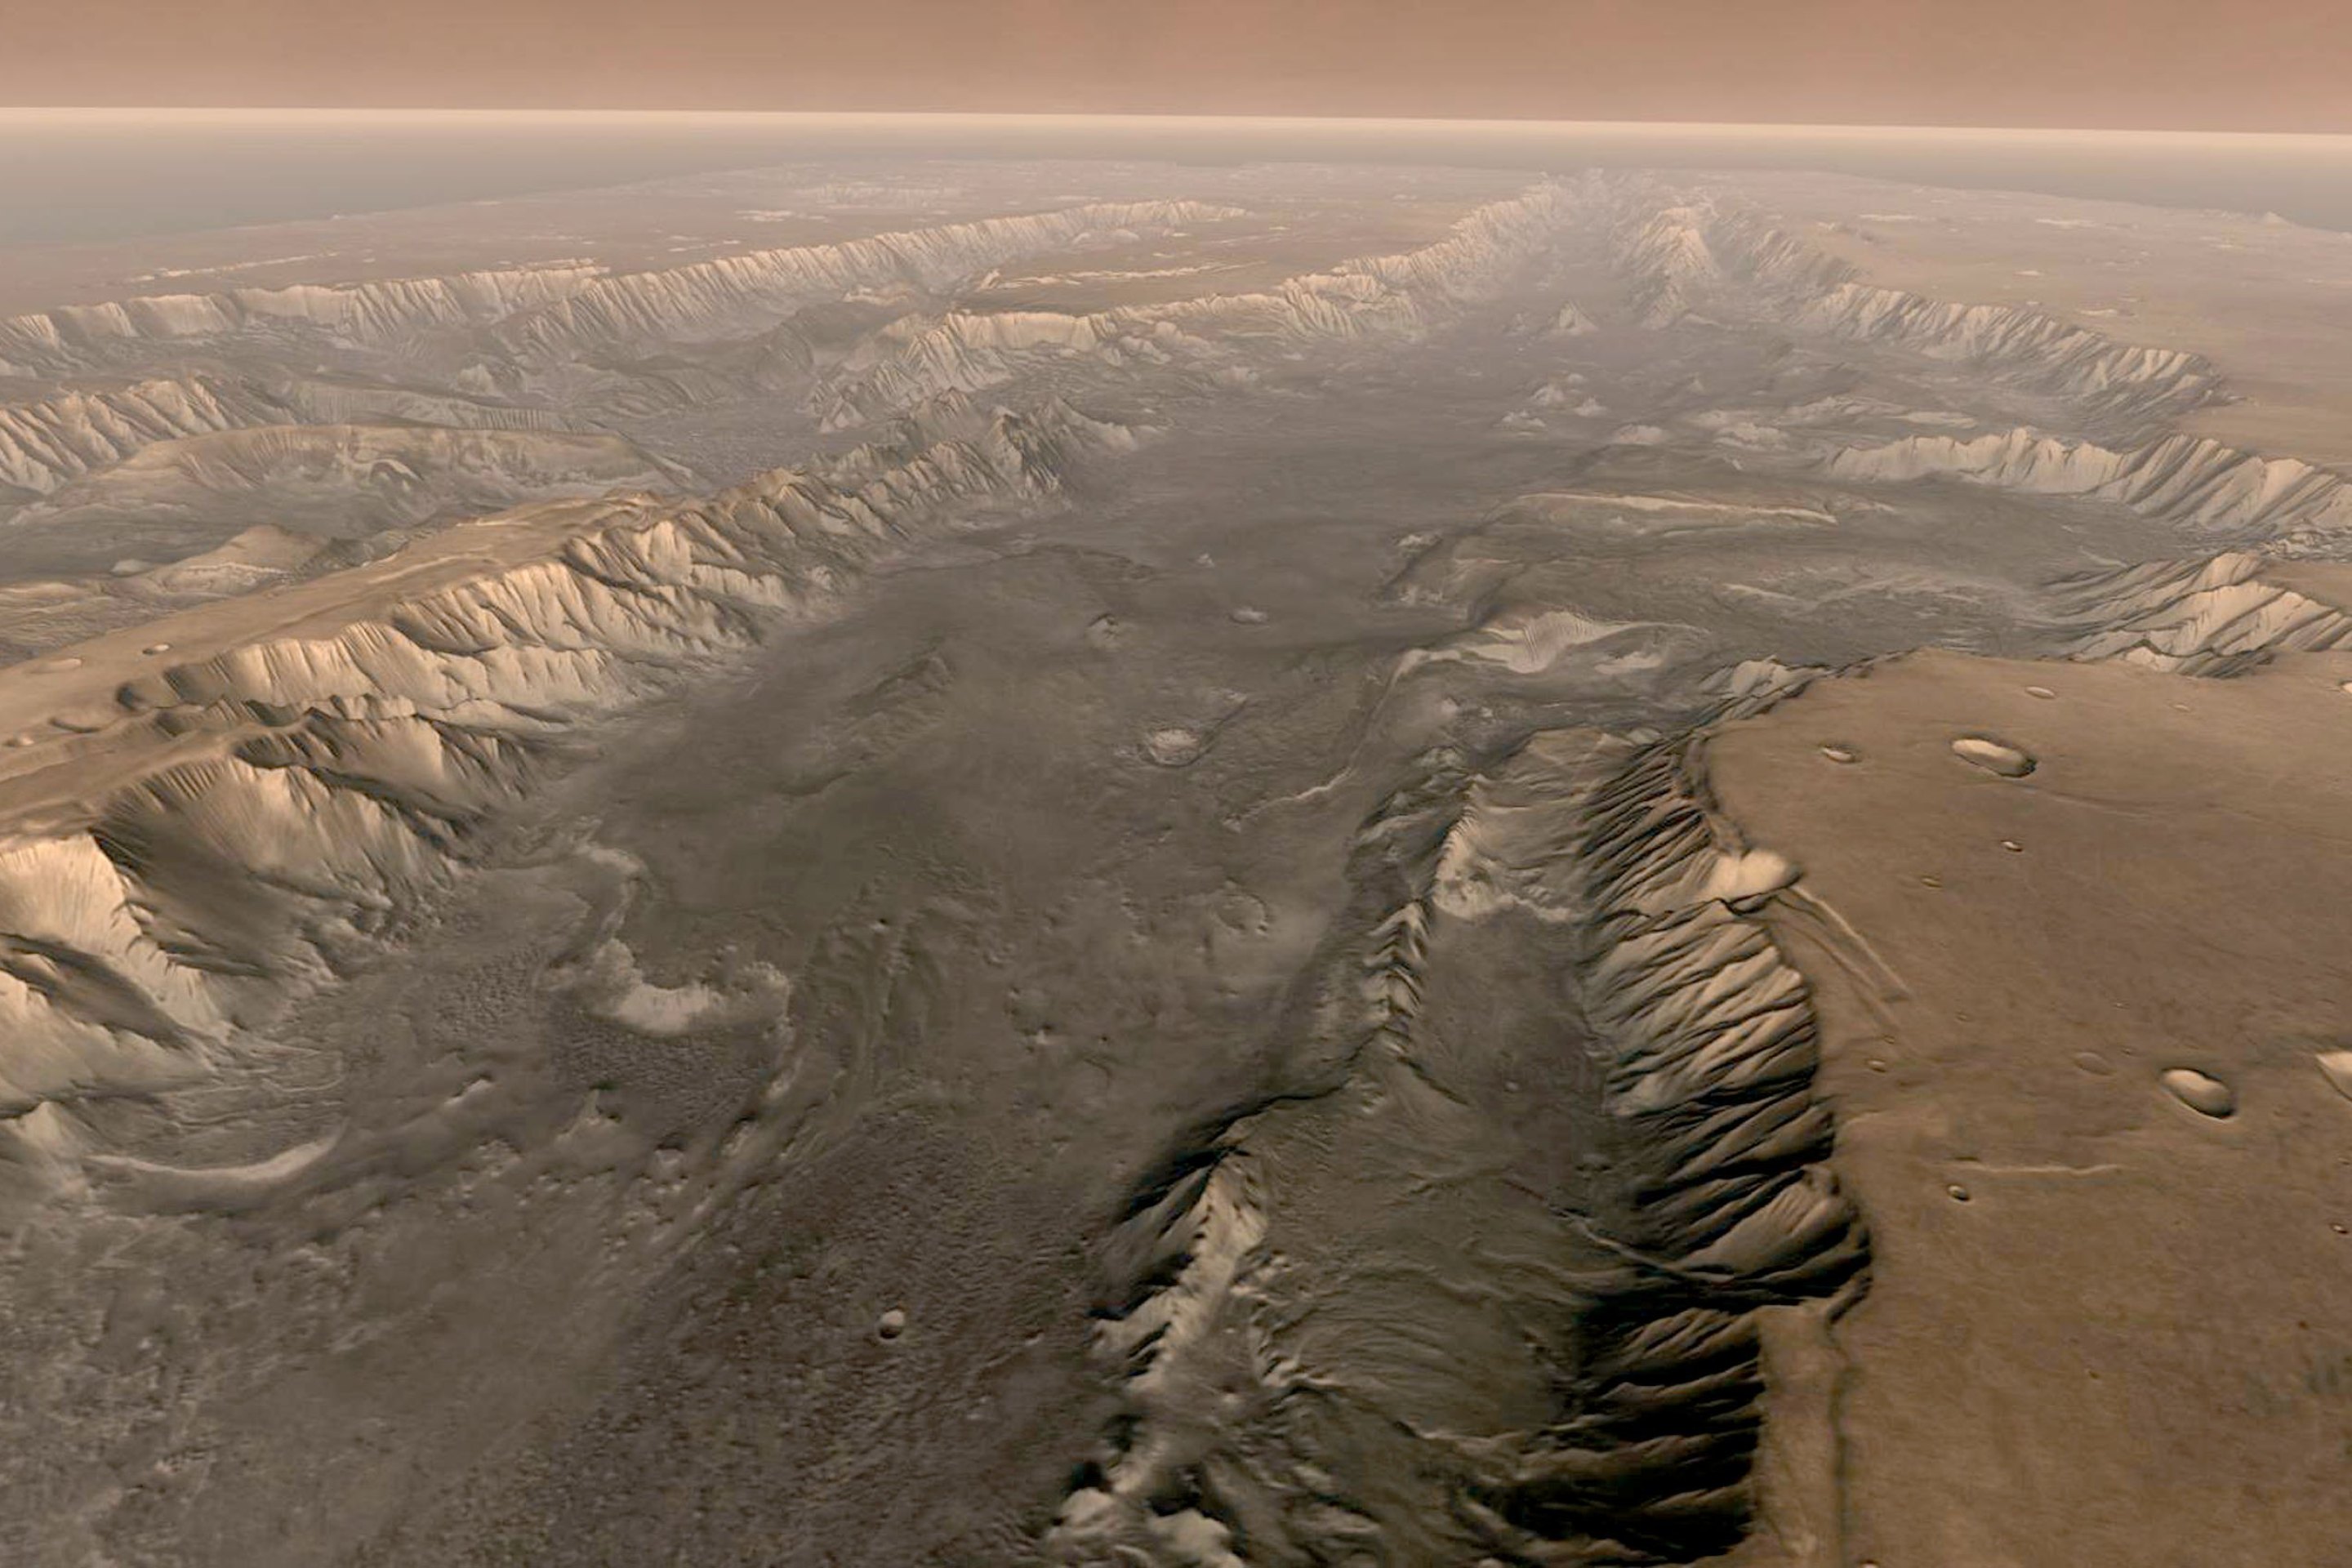 VALLES MARINERIS, MARS - Mars' own Grand Canyon, Valles Marineris, is shown on the surface of the planet in this composite image made aboard NASA's Mars Odyssey spacecraft. The image was taken from a video featuring high-resolution images from Arizona State University's Thermal Emission Imaging System multi-band camera on board the spacecraft. The mosaic was then colored to approximate how Mars would look to the human eye. Valles Marineris is 10 times longer, five times deeper and 20 times wider than Earth's Grand Canyon. (Photo by NASA/Arizona State University via Getty Images)